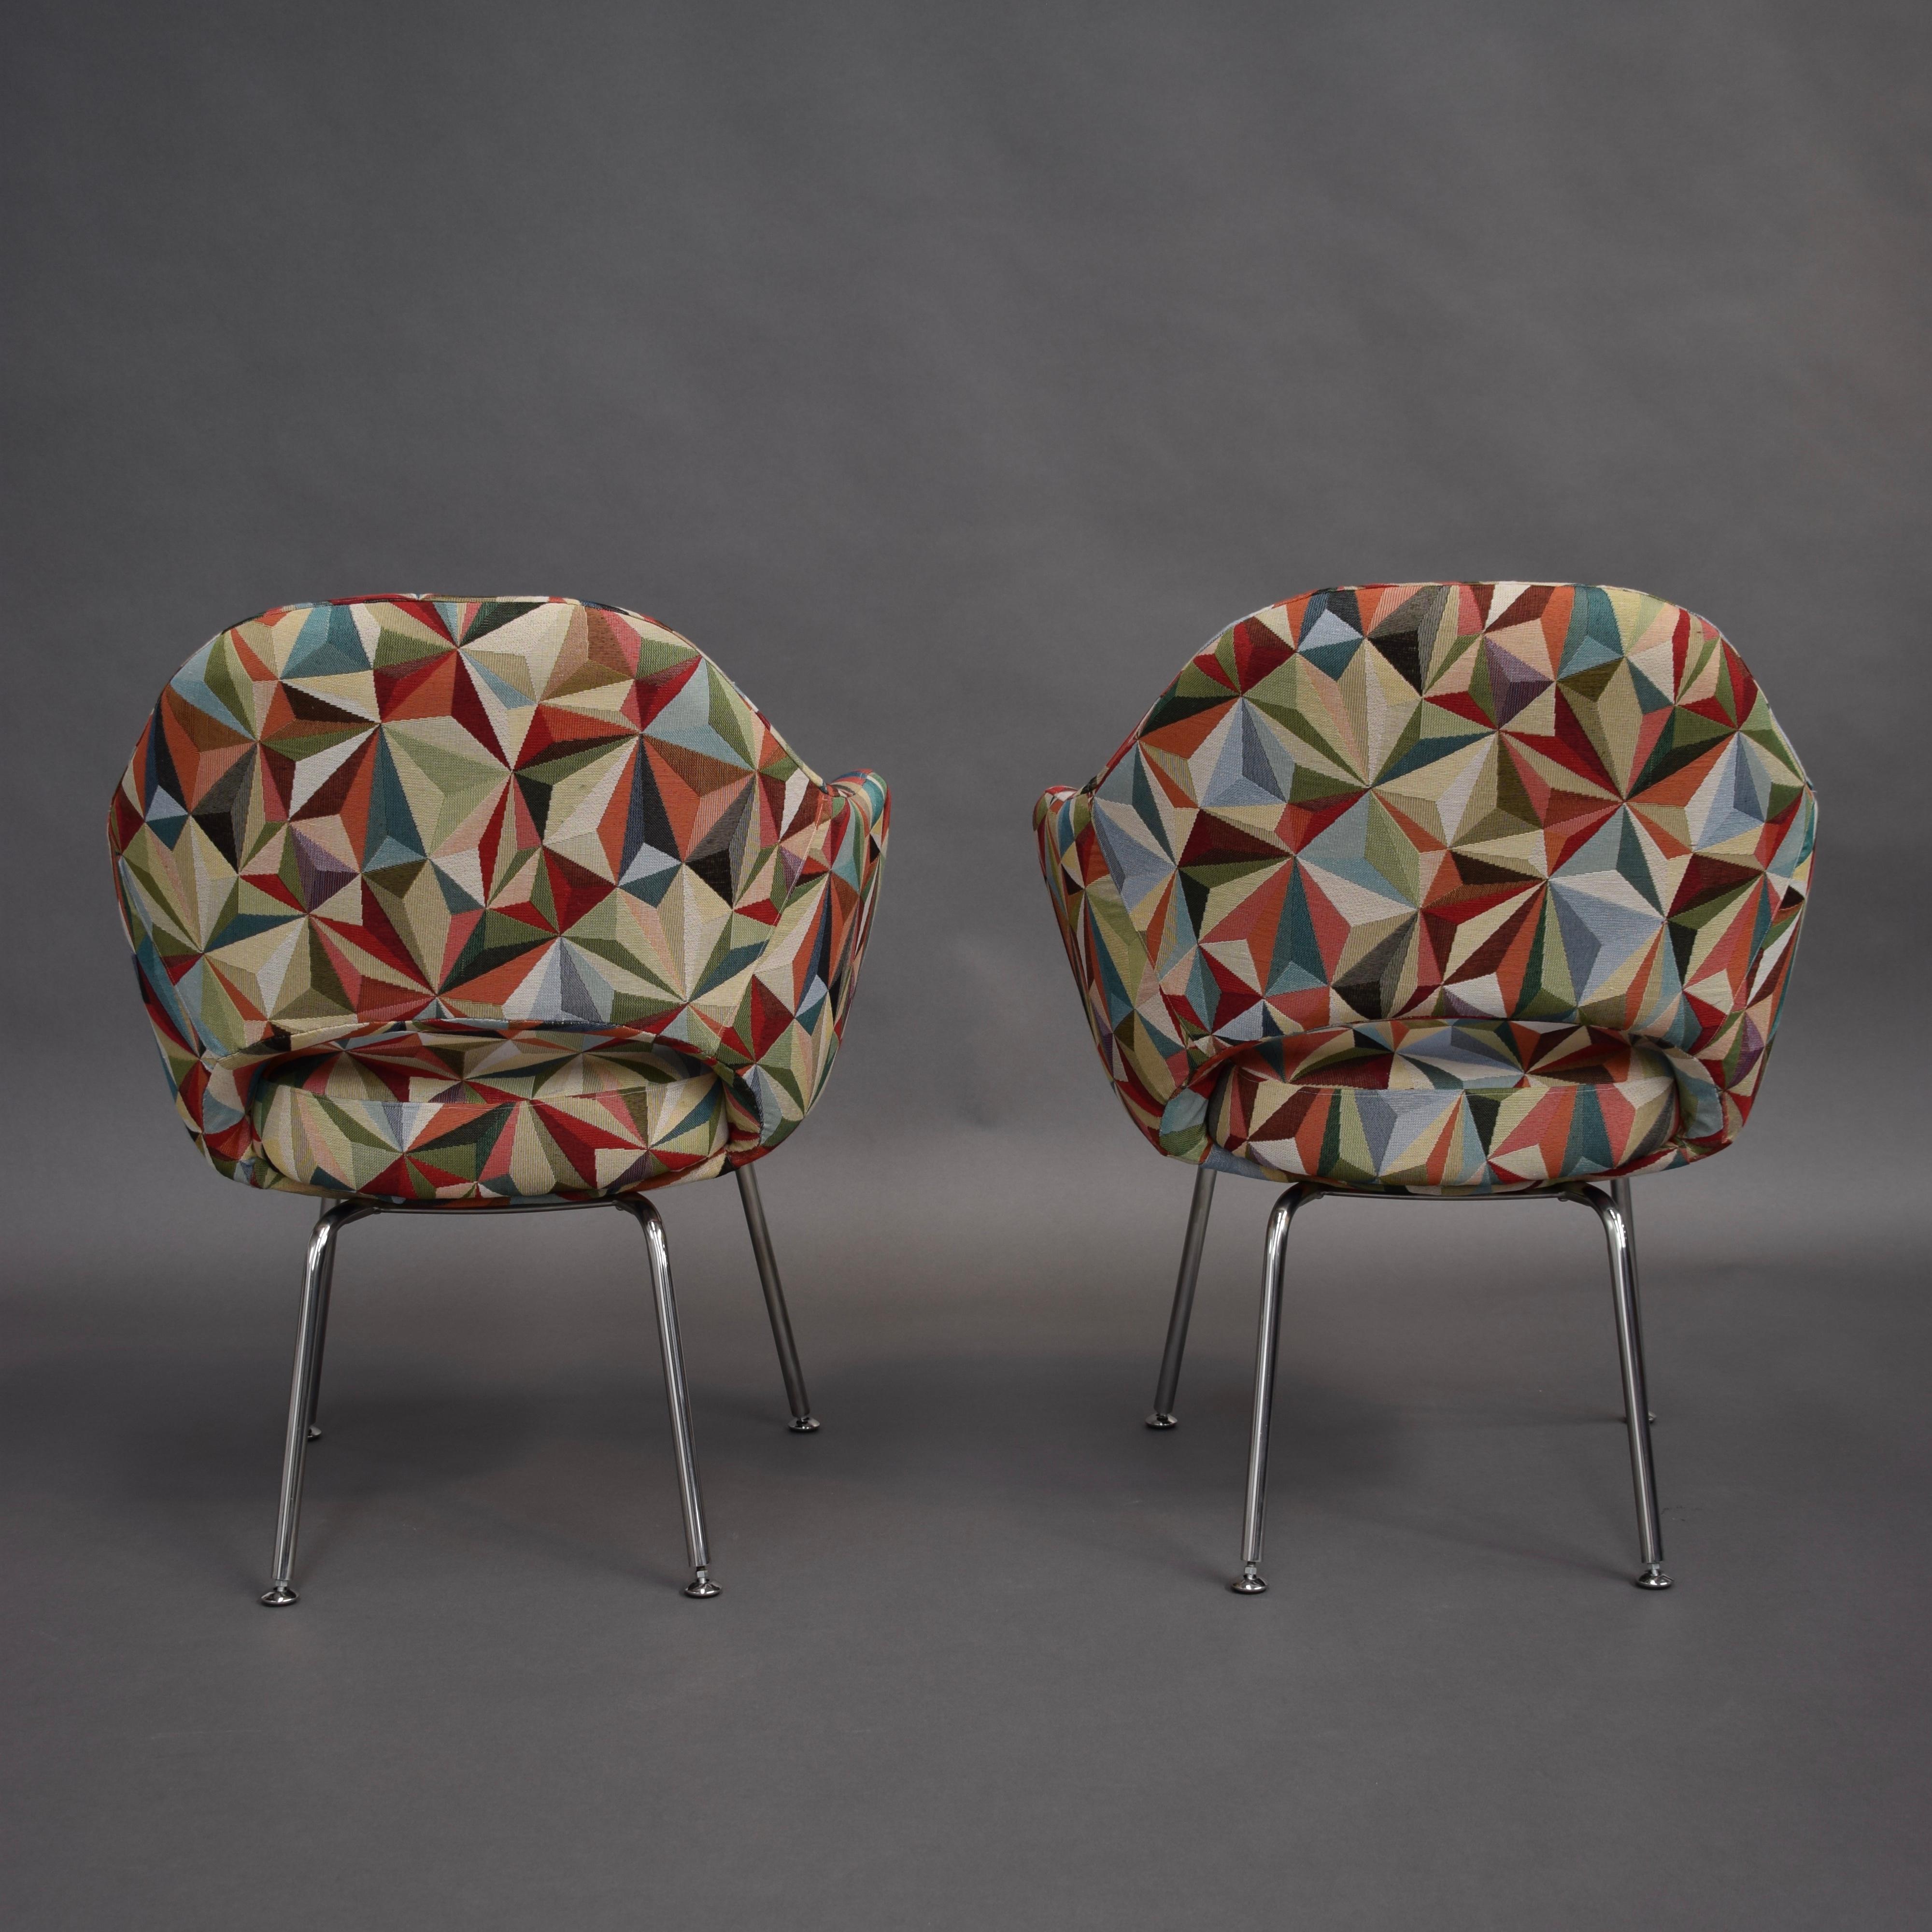 American Pair of Armchairs by Eero Saarinen for Knoll with New Upholstery, USA circa 1960